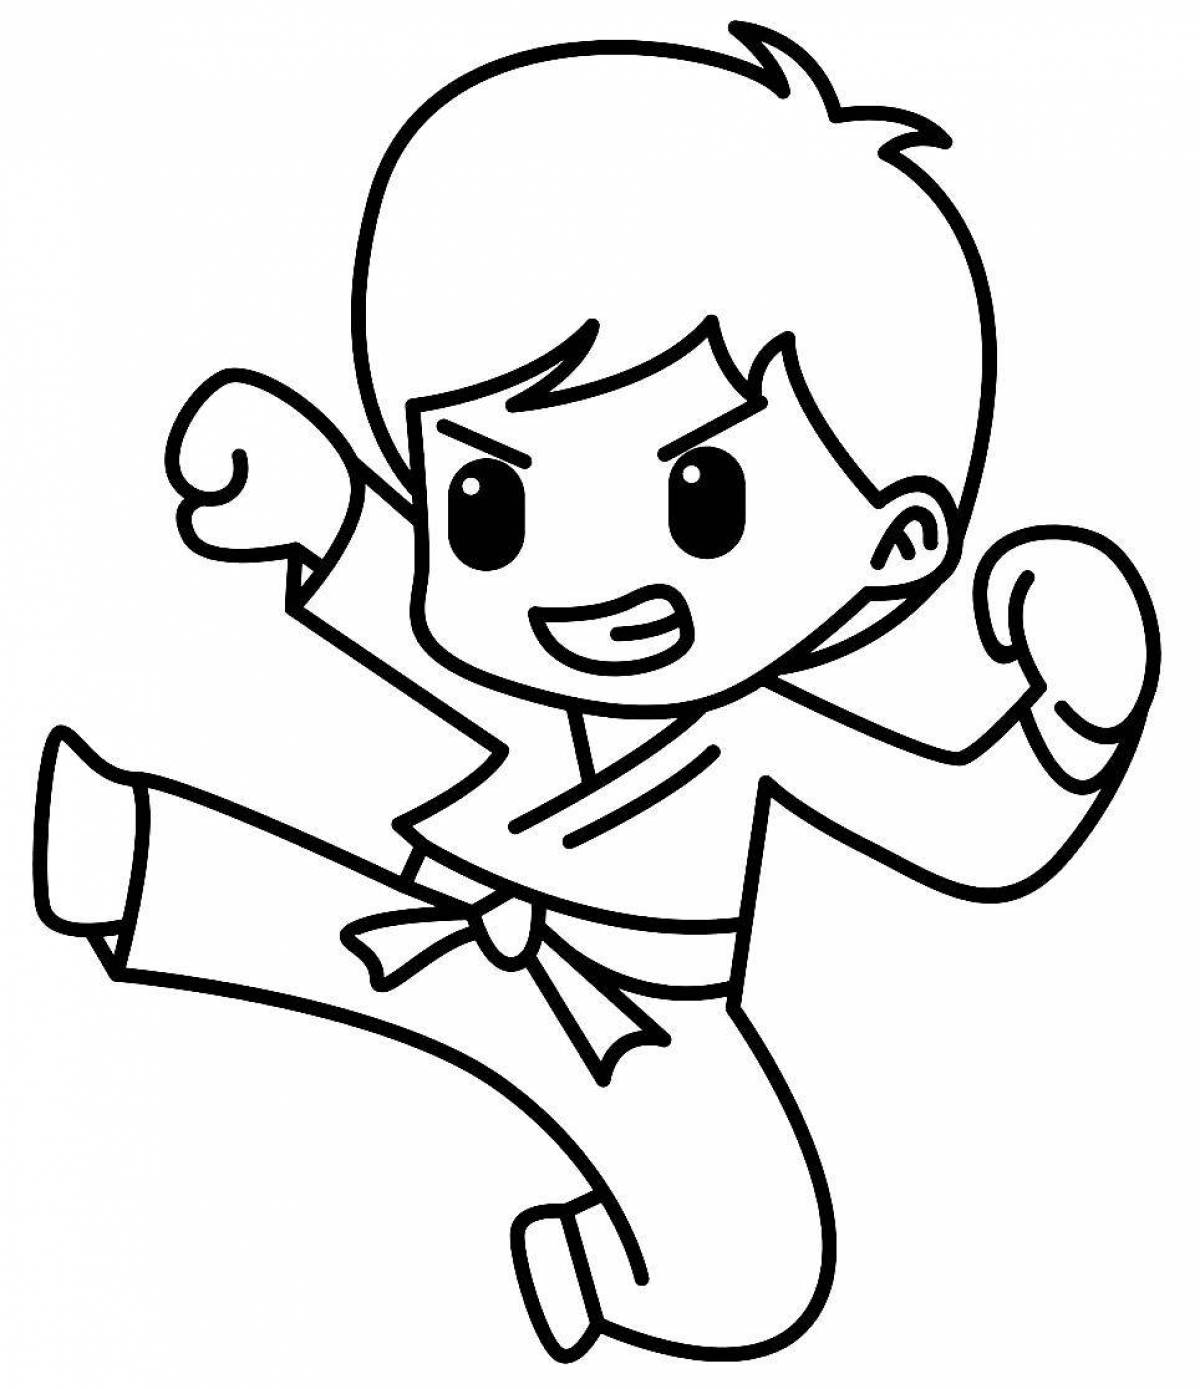 Exciting karate coloring book for kids